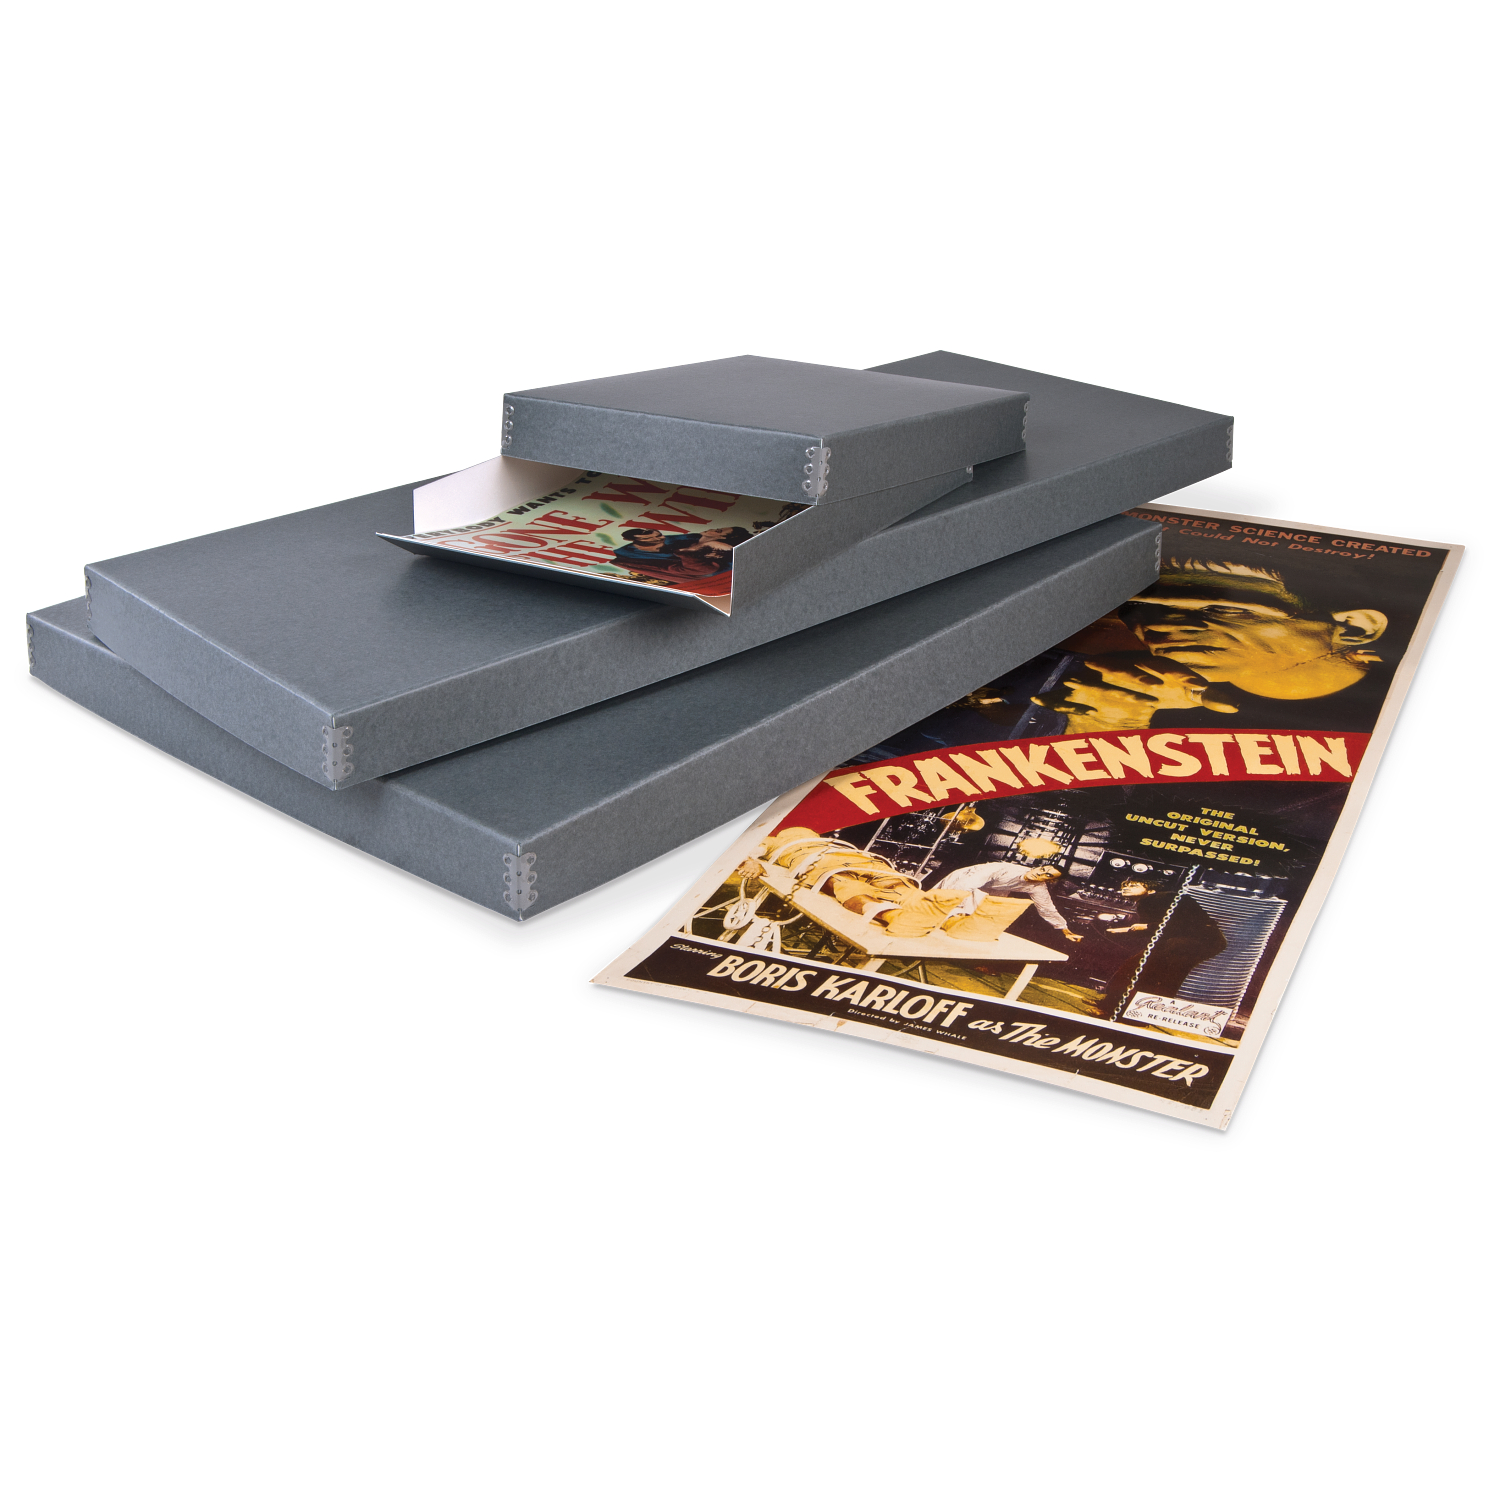 Gaylord Archival® Trading Card Box, Storage Boxes